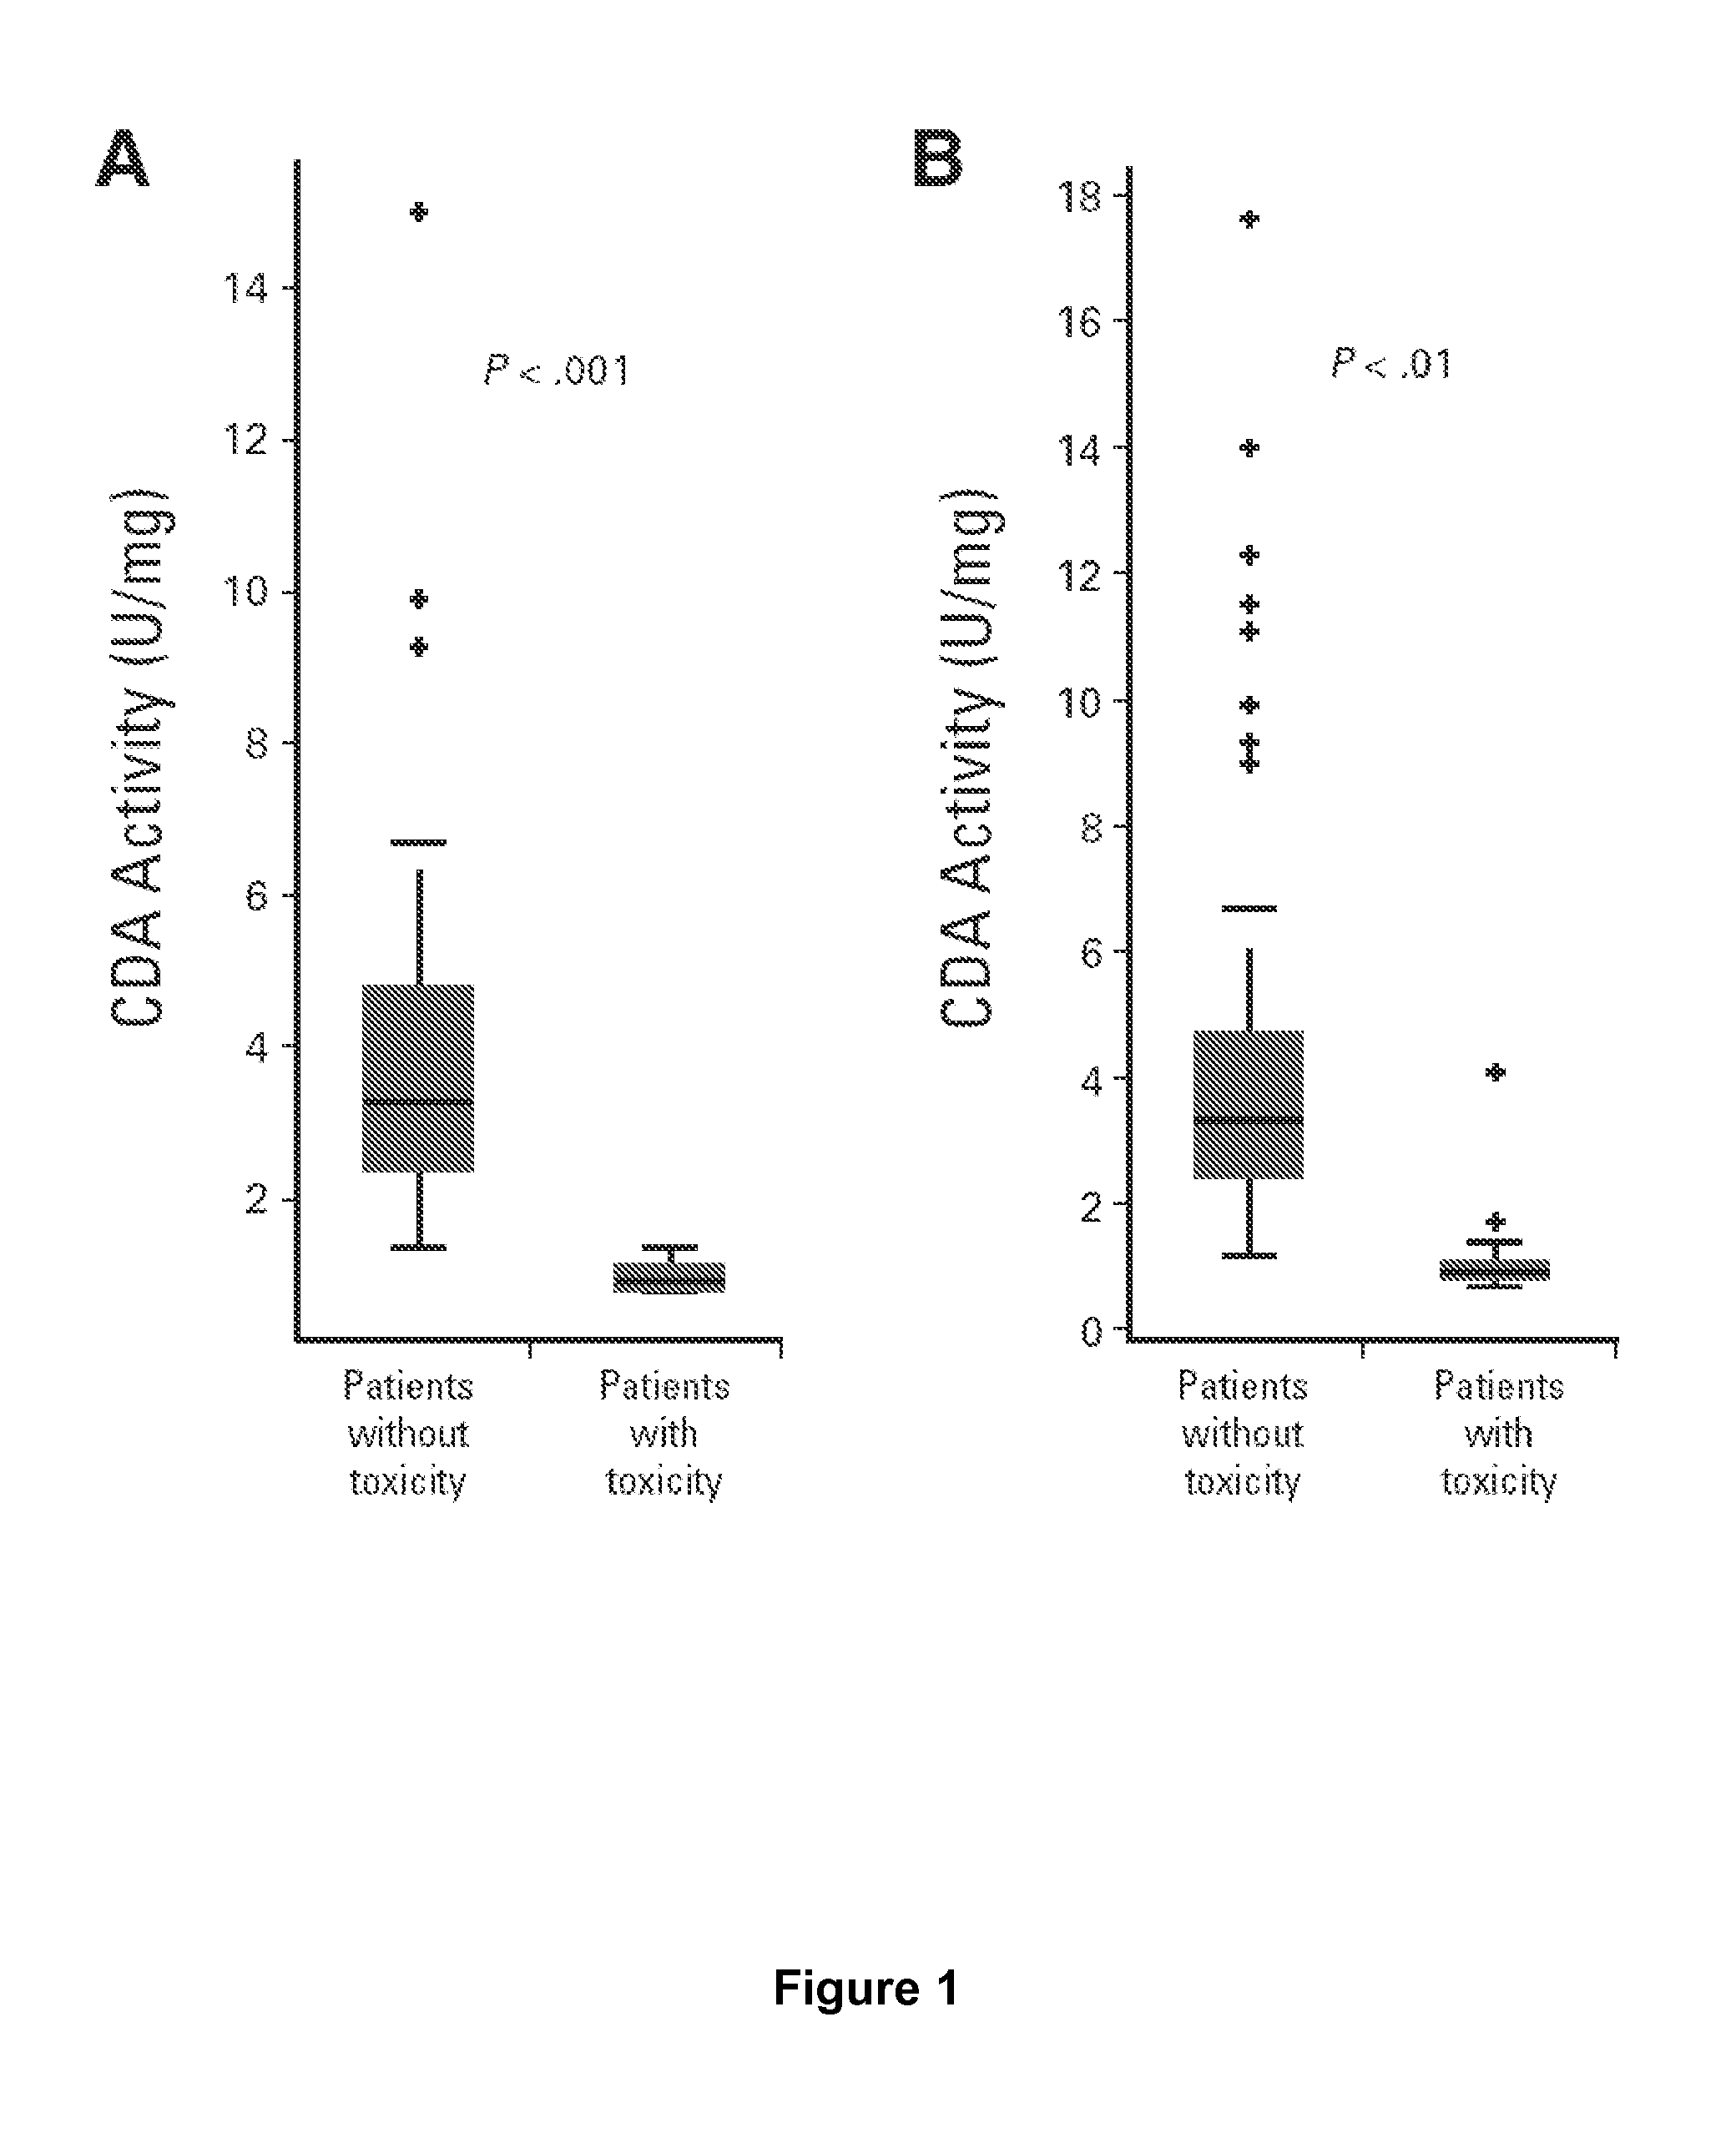 Method for assessing the ability of a patient to respond to or be safely treated by a nucleoside analog based-chemotherapy